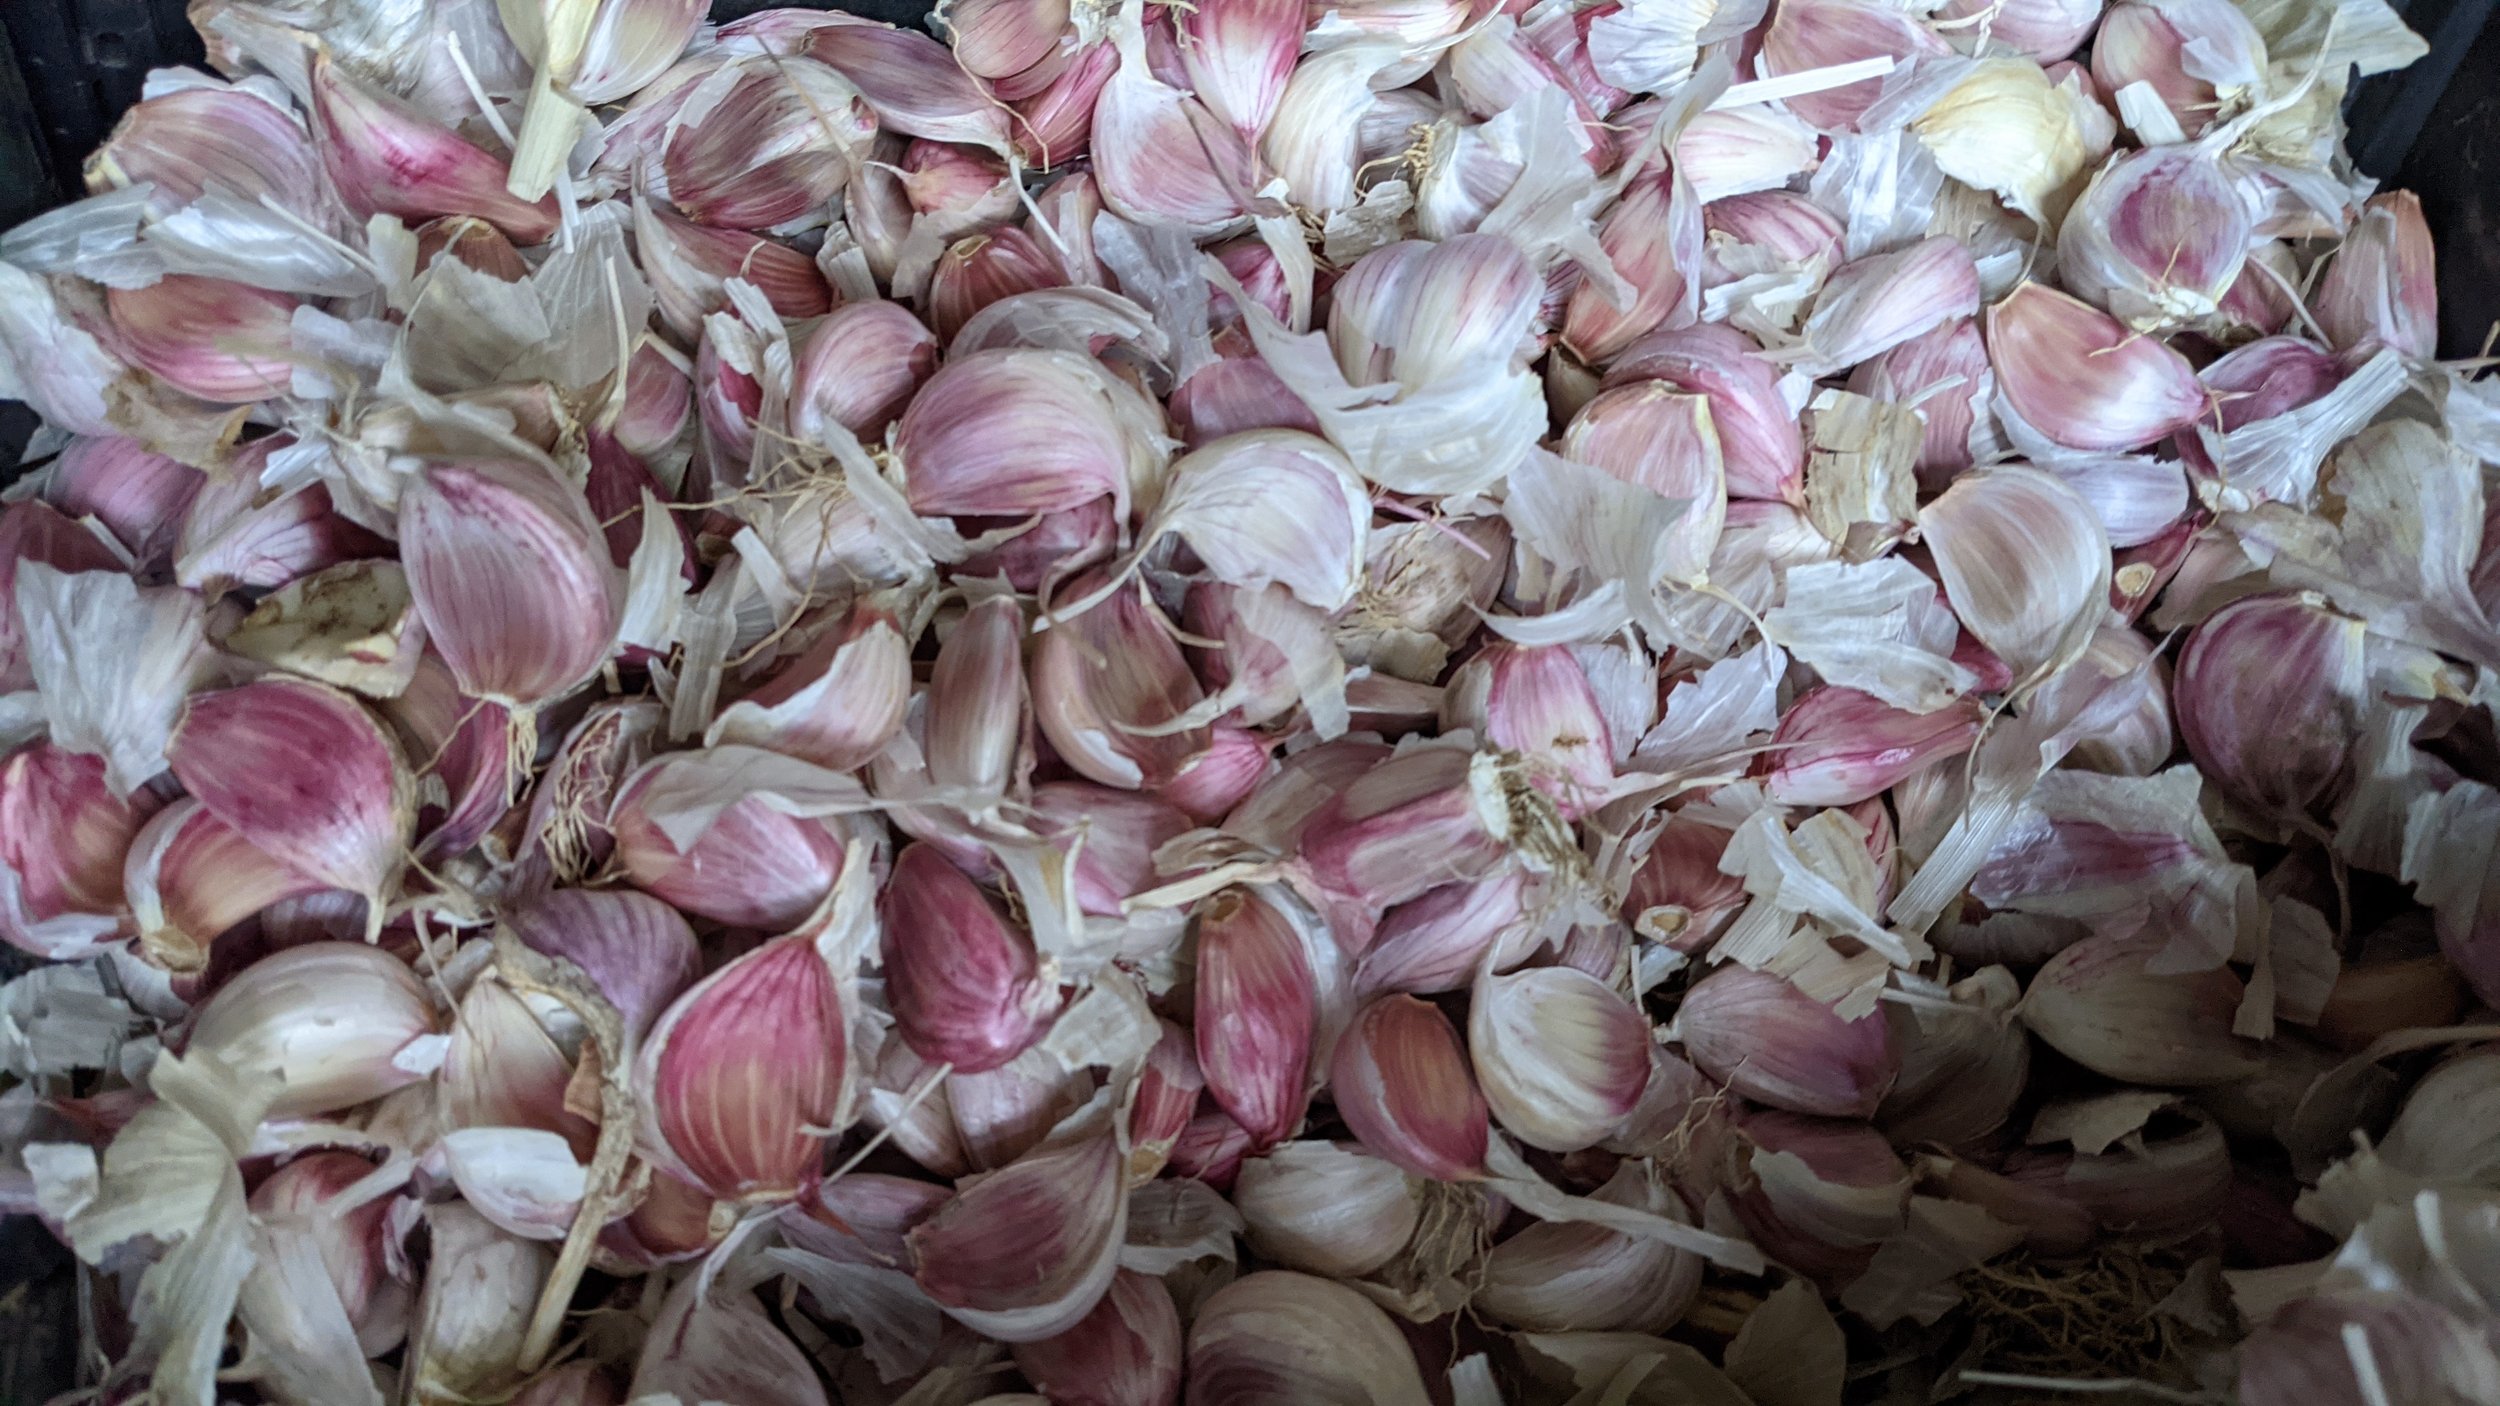  We planted three different types of garlic this fall for harvest next year. 